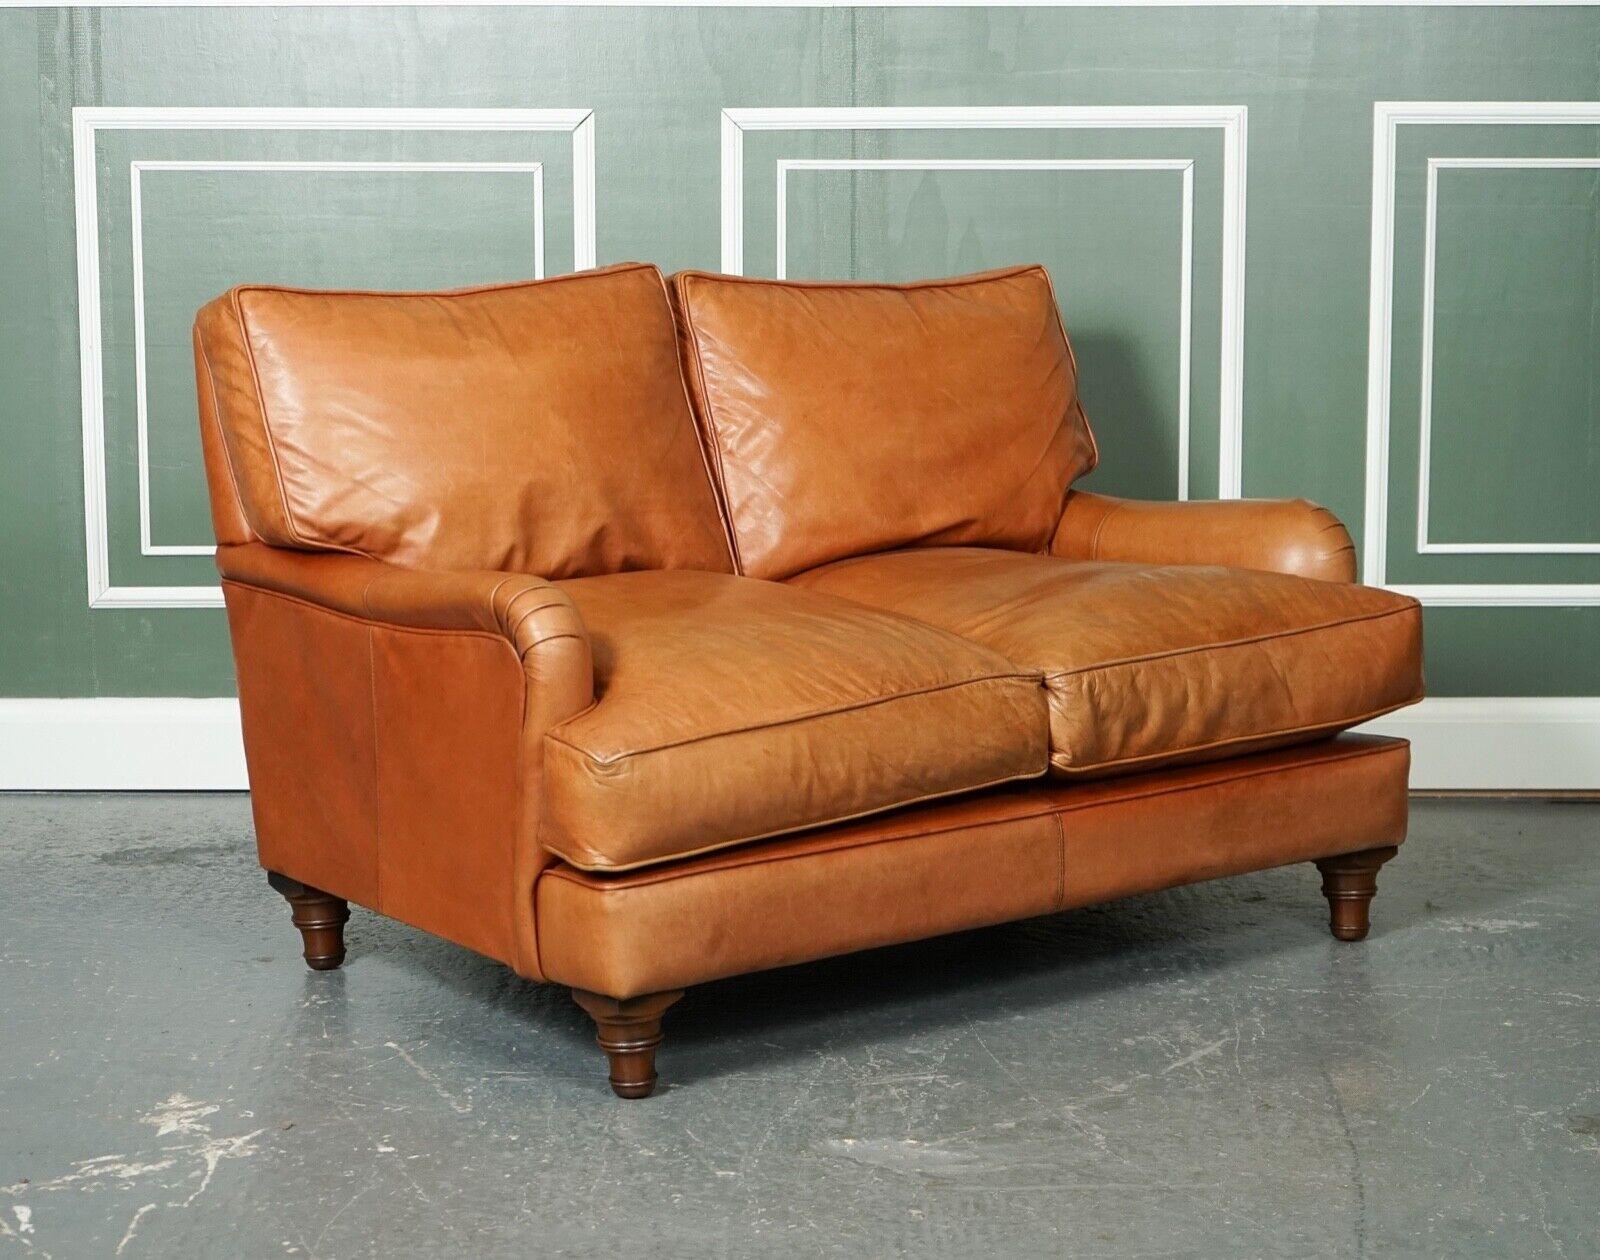 We are so excited to present to you this lovely vintage tan leather Howard-style sofa.

Lovely Howard style sofa with duck feather-filled cushions, seat and back cushions.

The leather after being waxed feels very soft and has much life left,